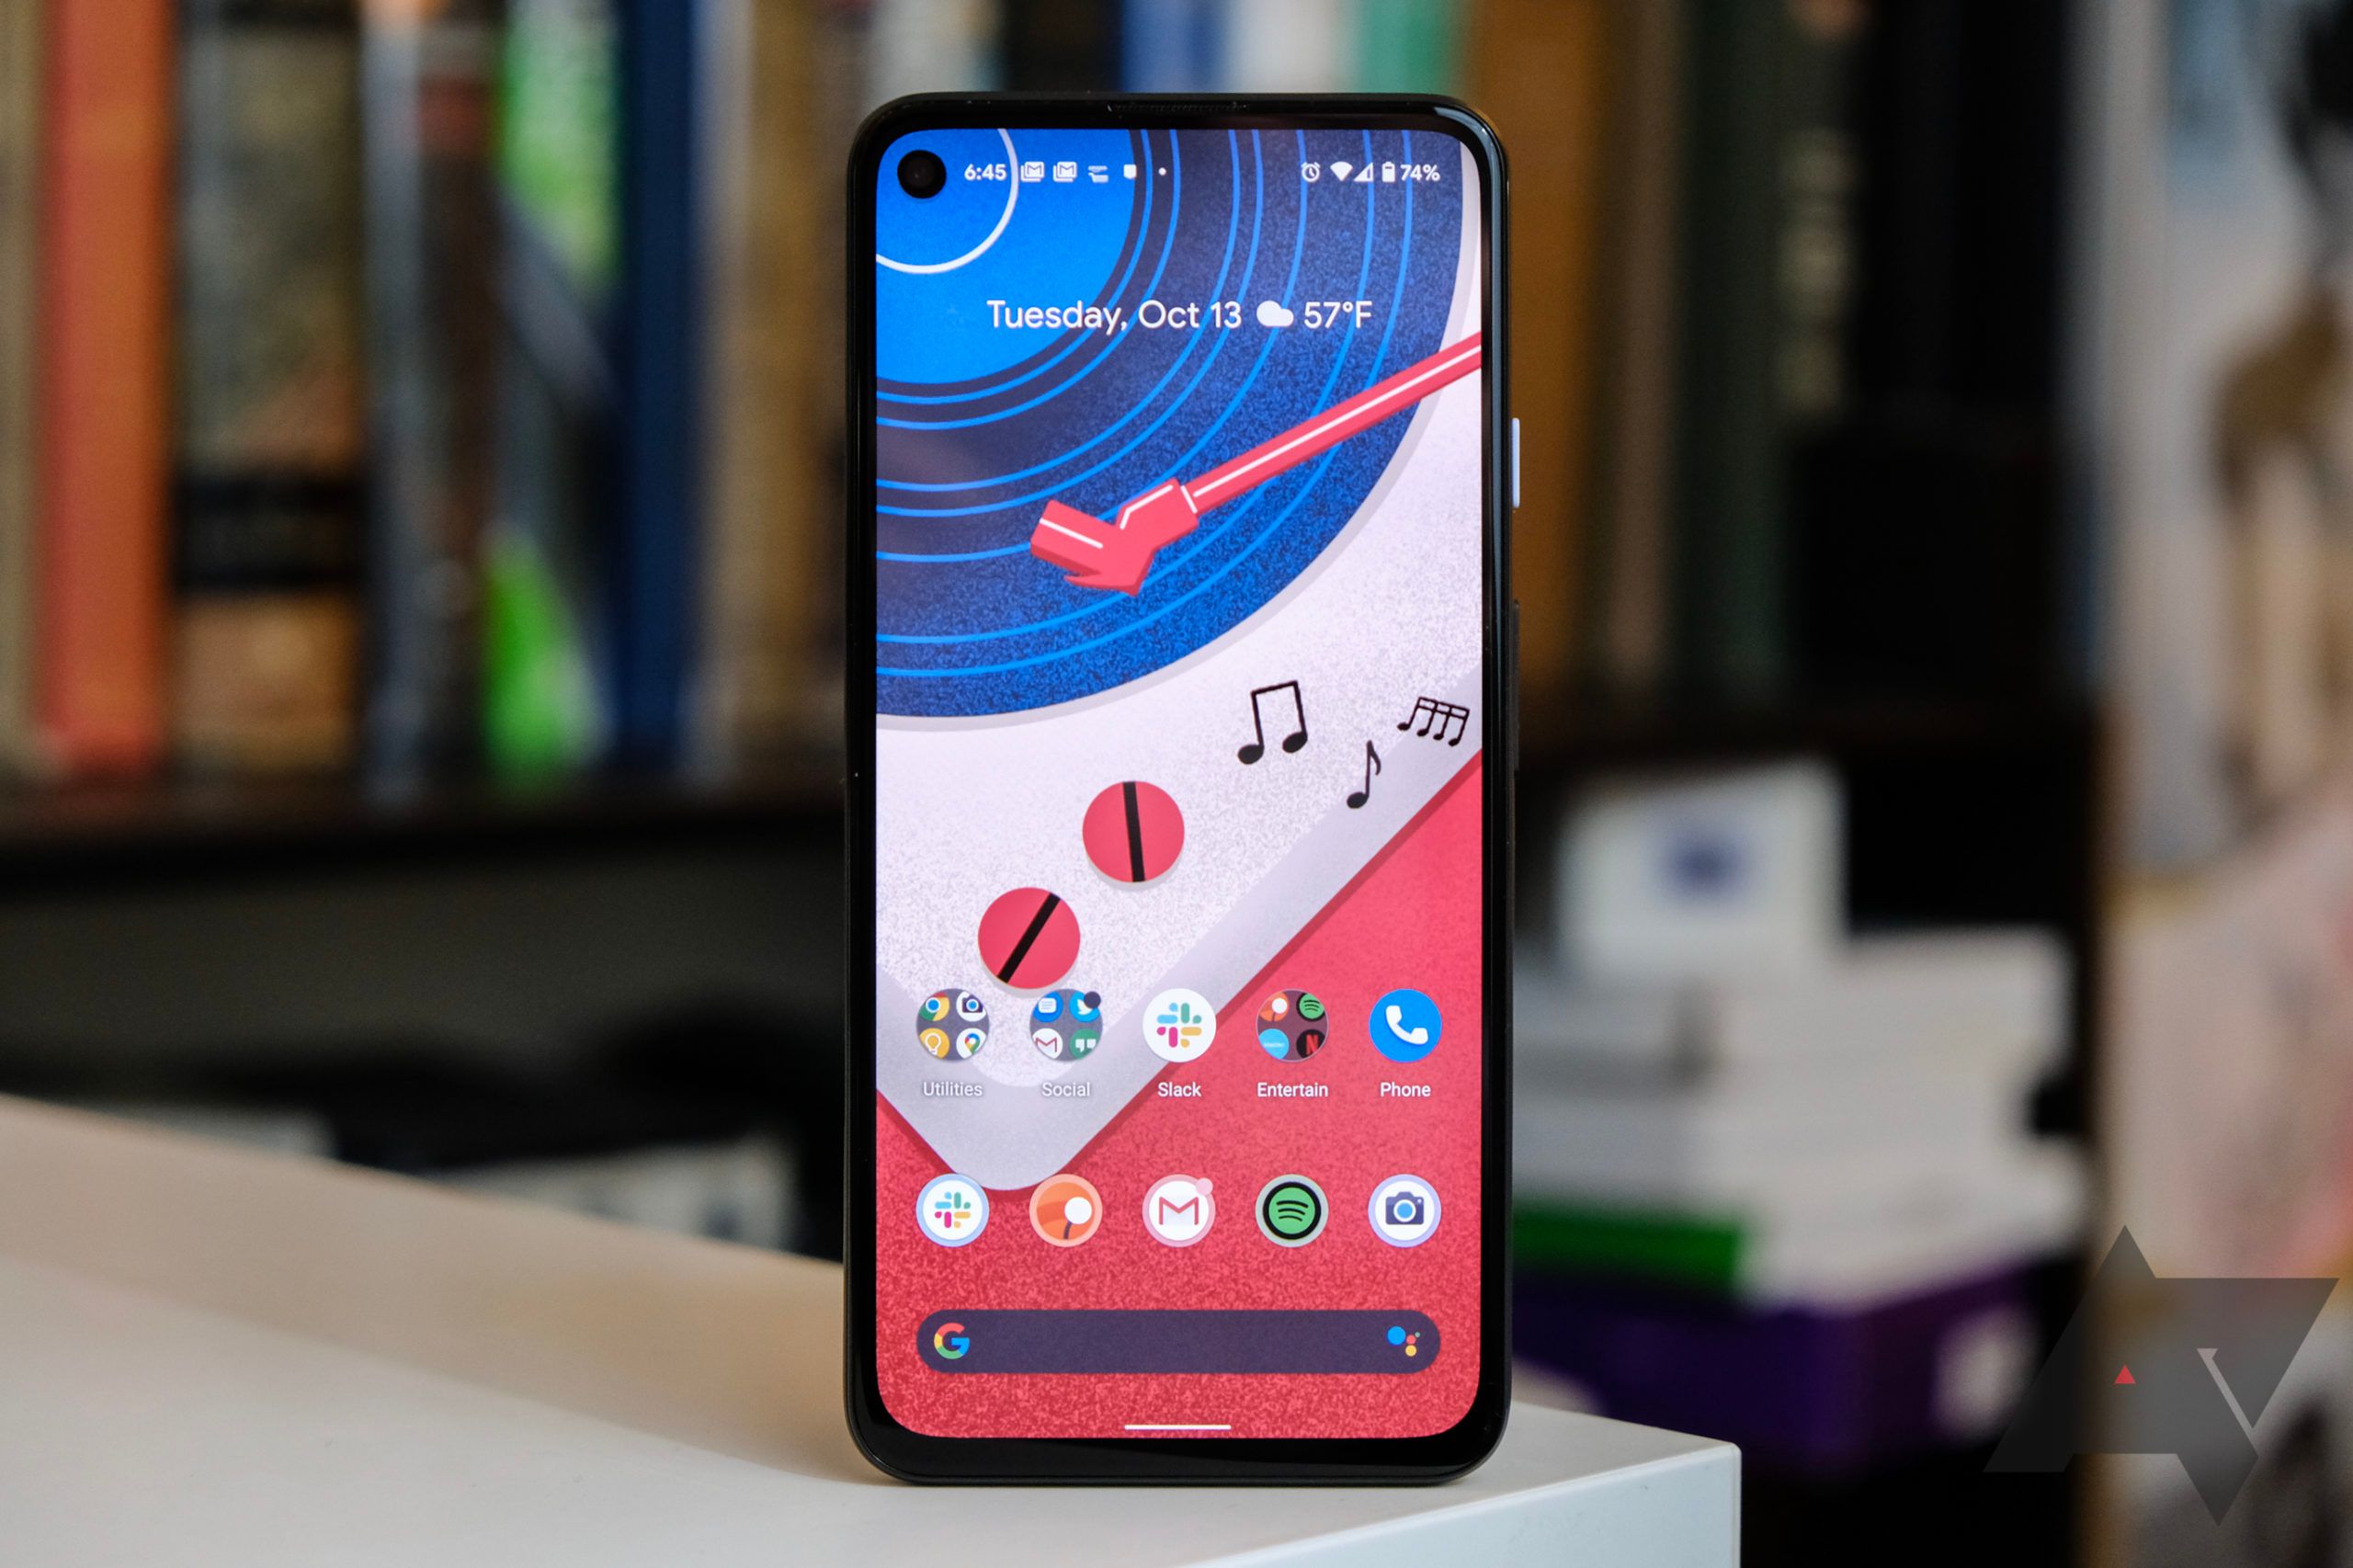 A Google Pixel 4a 5g on a countertop with a bookshelf filled with books in the background